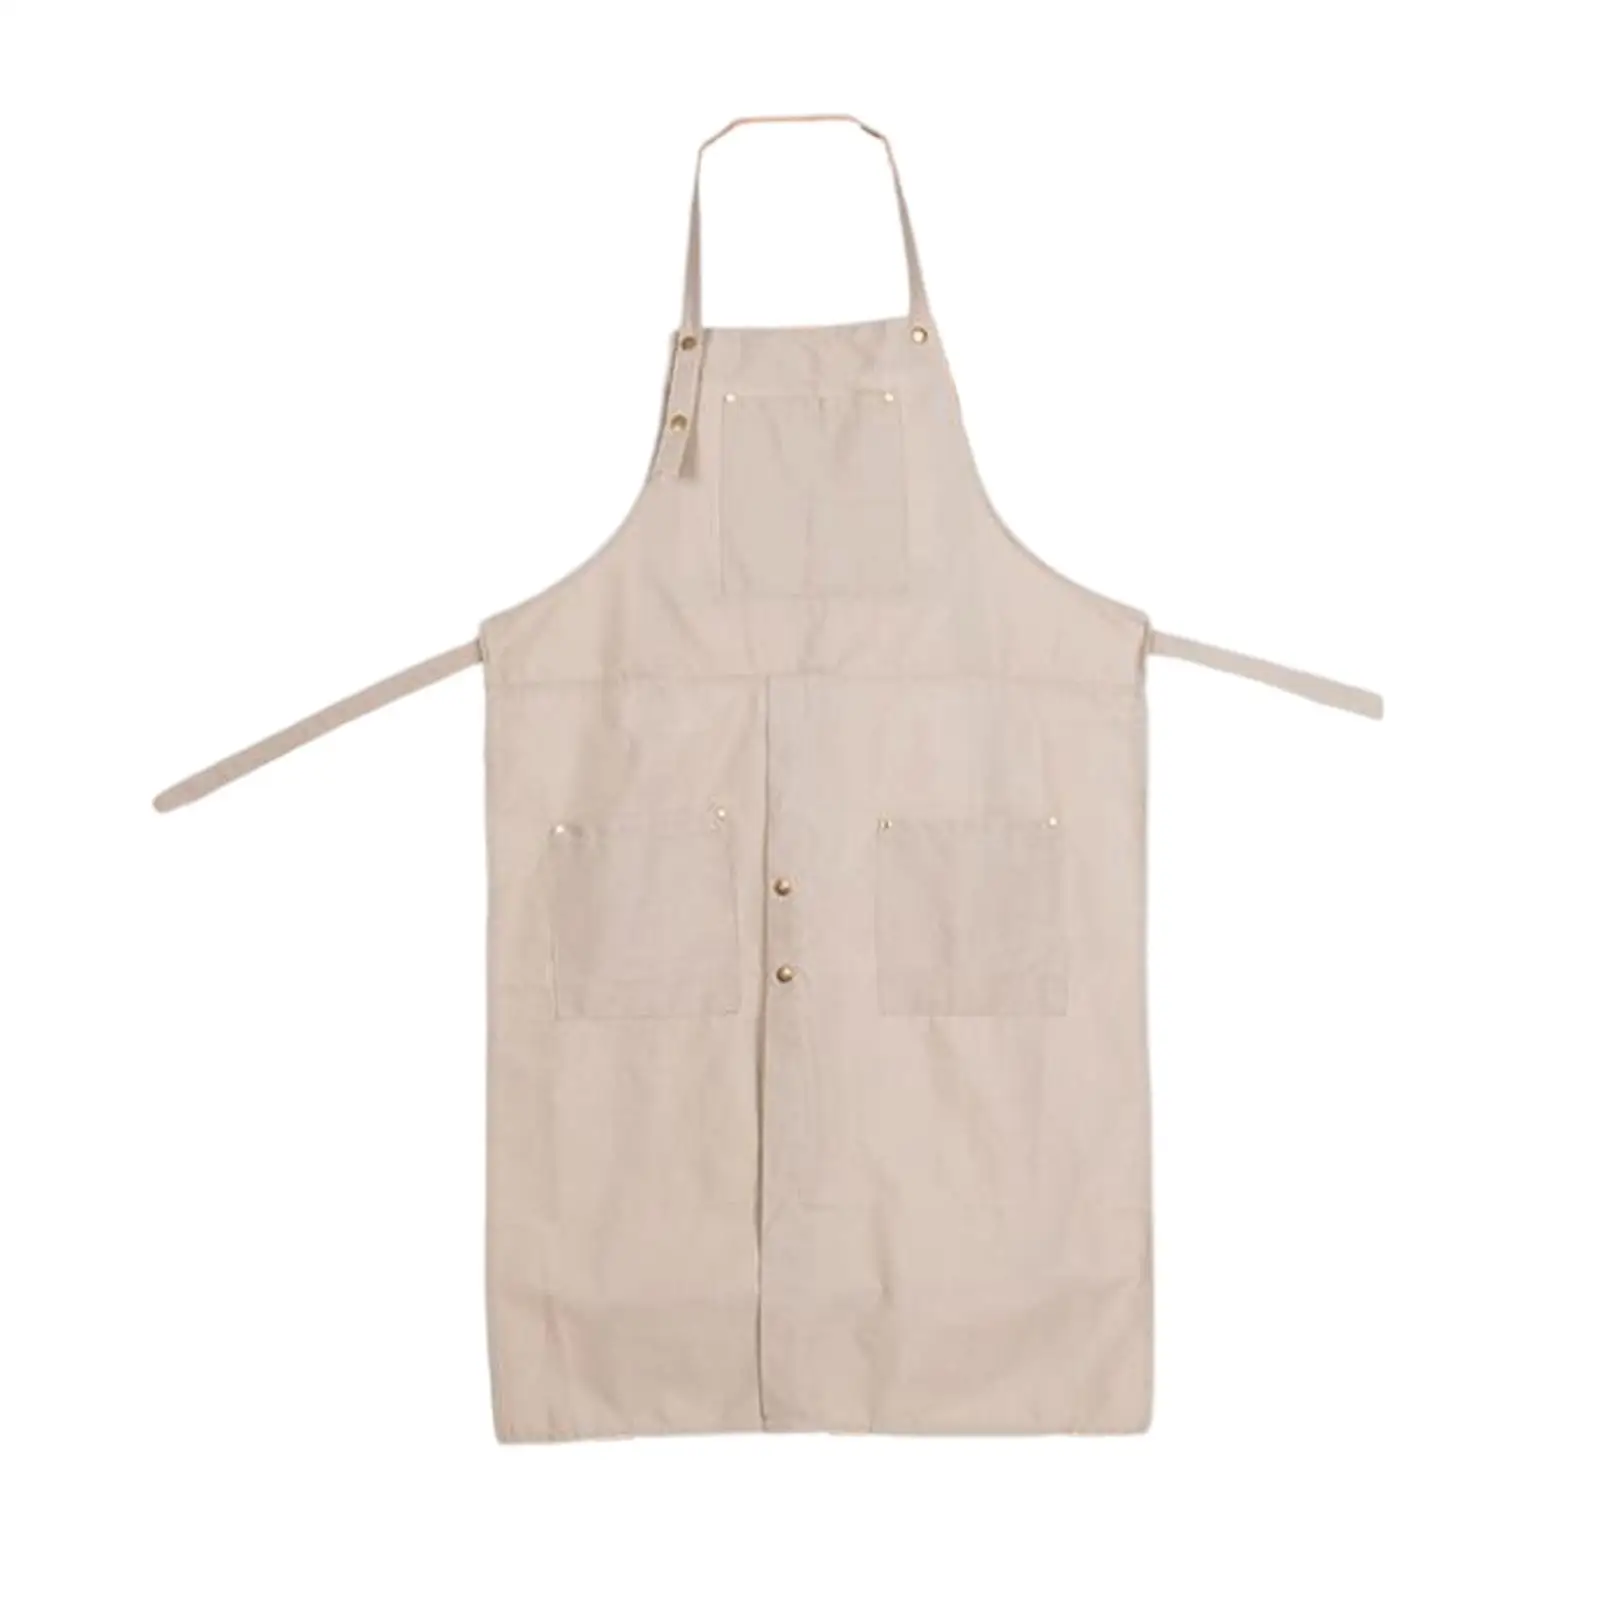 Professional Canvas Apron Aprons Uniform W/Pockets for Cooking Indoor Hair Cut